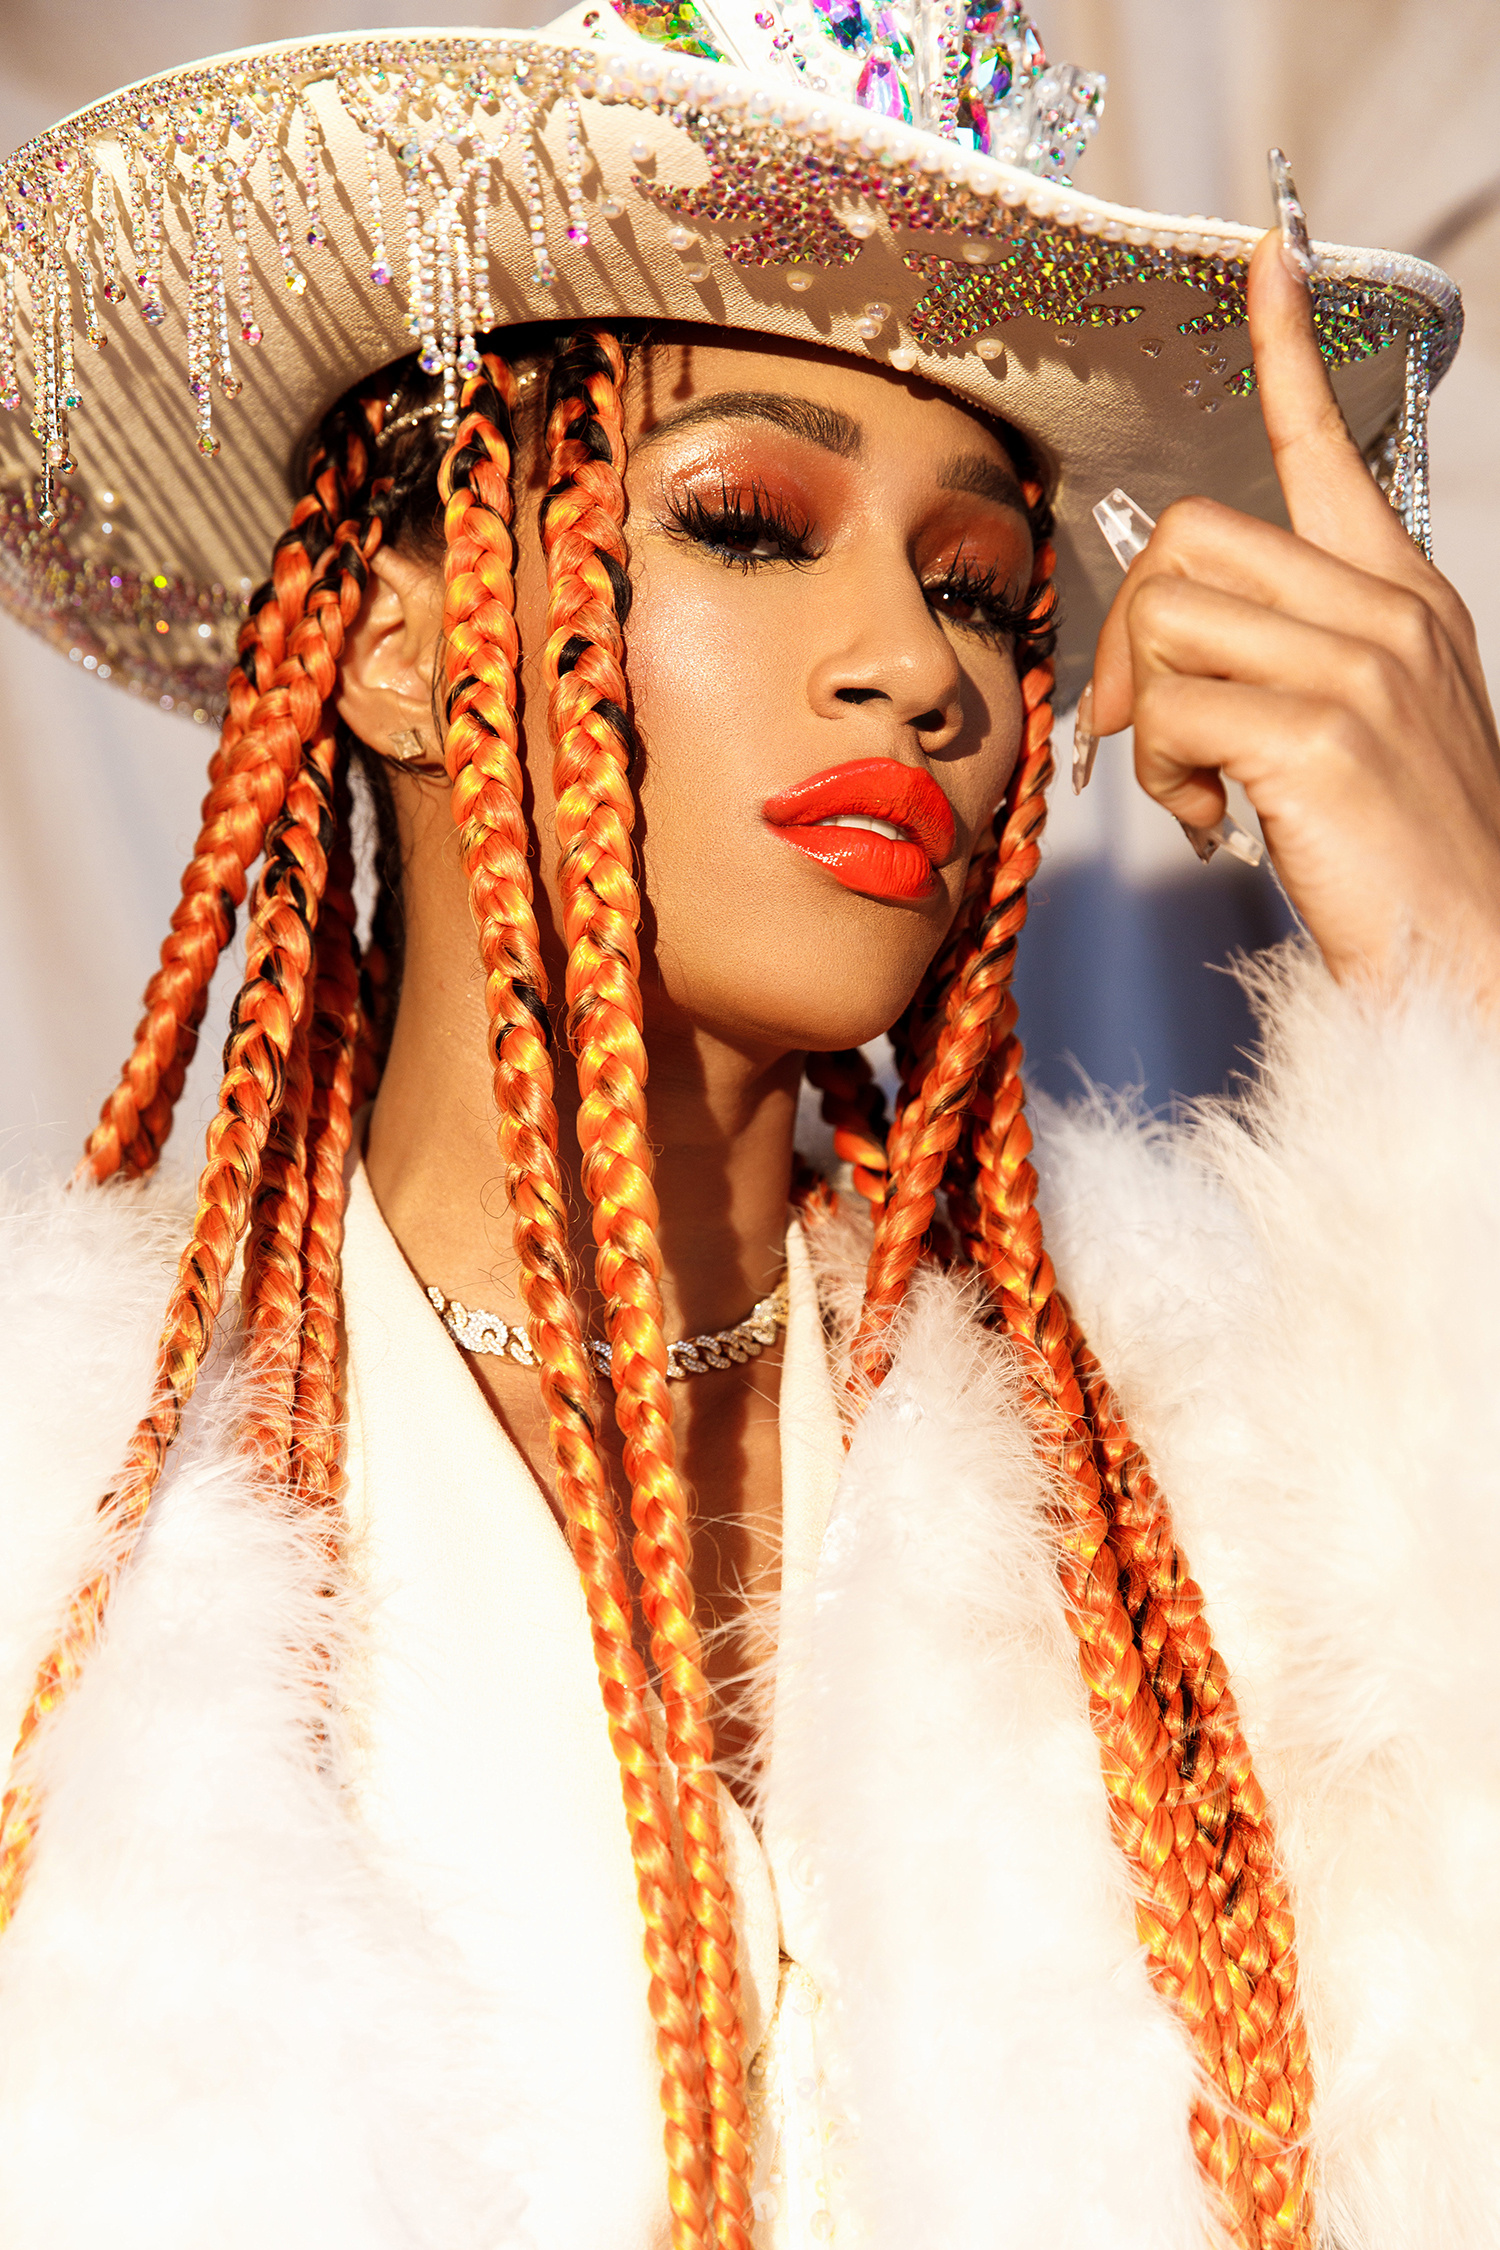 BIA Discusses New Music and Next Moves, She's Definitely a COVER GIRL | This Bitch Magazine 1500x2250